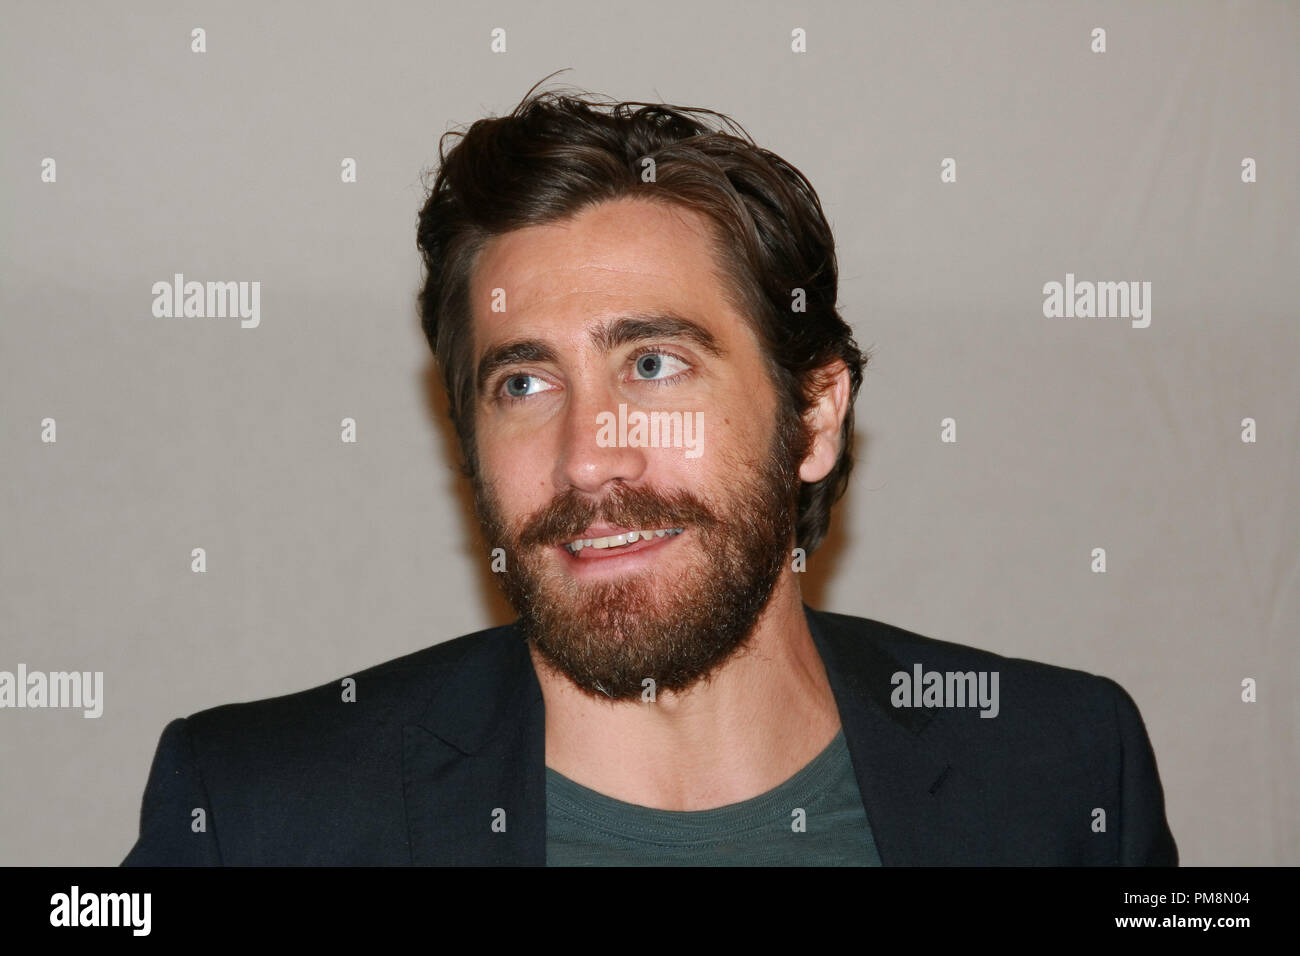 Jake Gyllenhaal 'End of Watch' Portrait Session, September 10, 2012.  Reproduction by American tabloids is absolutely forbidden. File Reference # 31670 004JRC  For Editorial Use Only -  All Rights Reserved Stock Photo